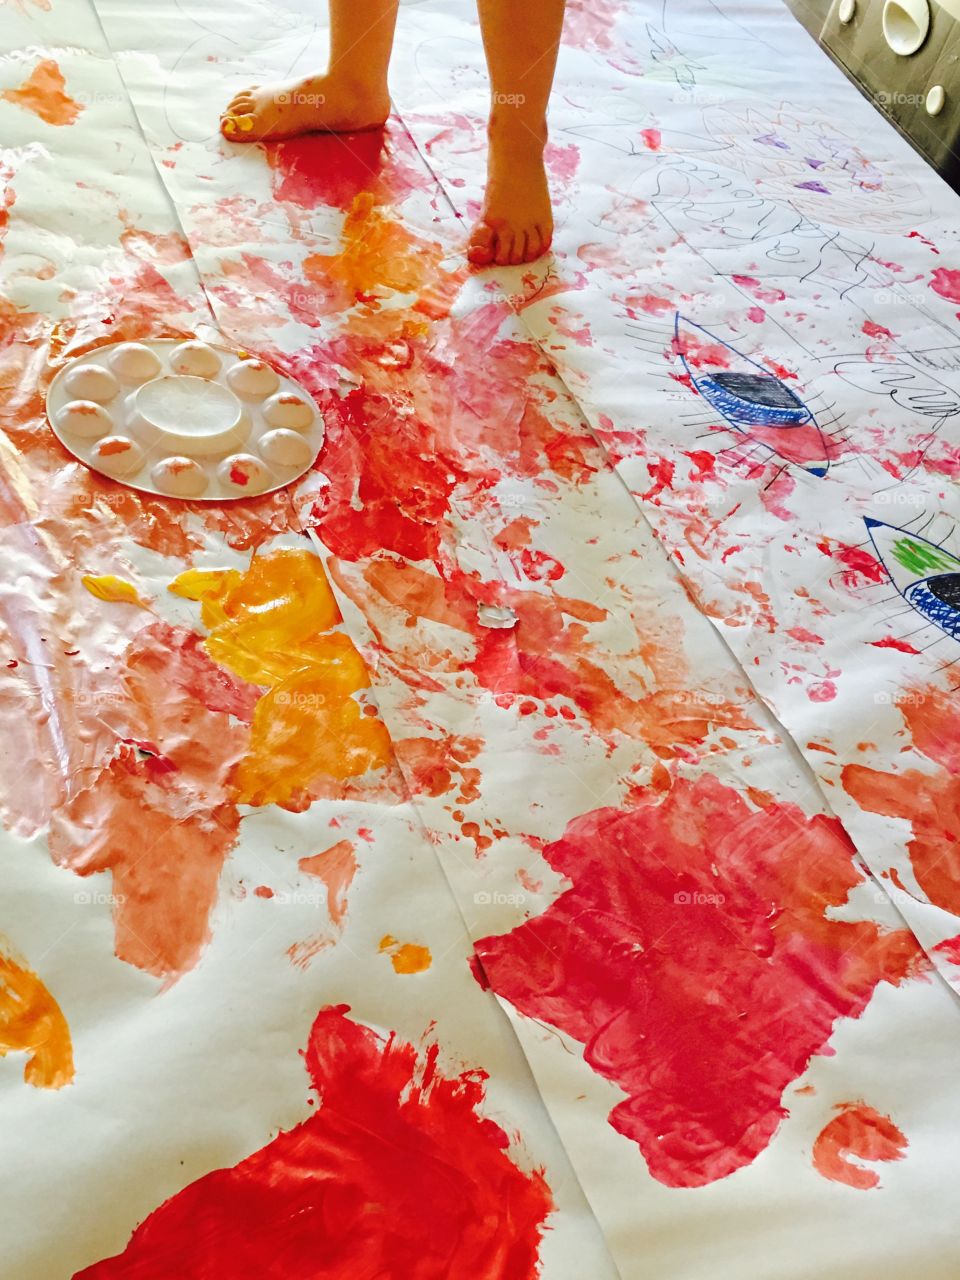 Kids painting on the table